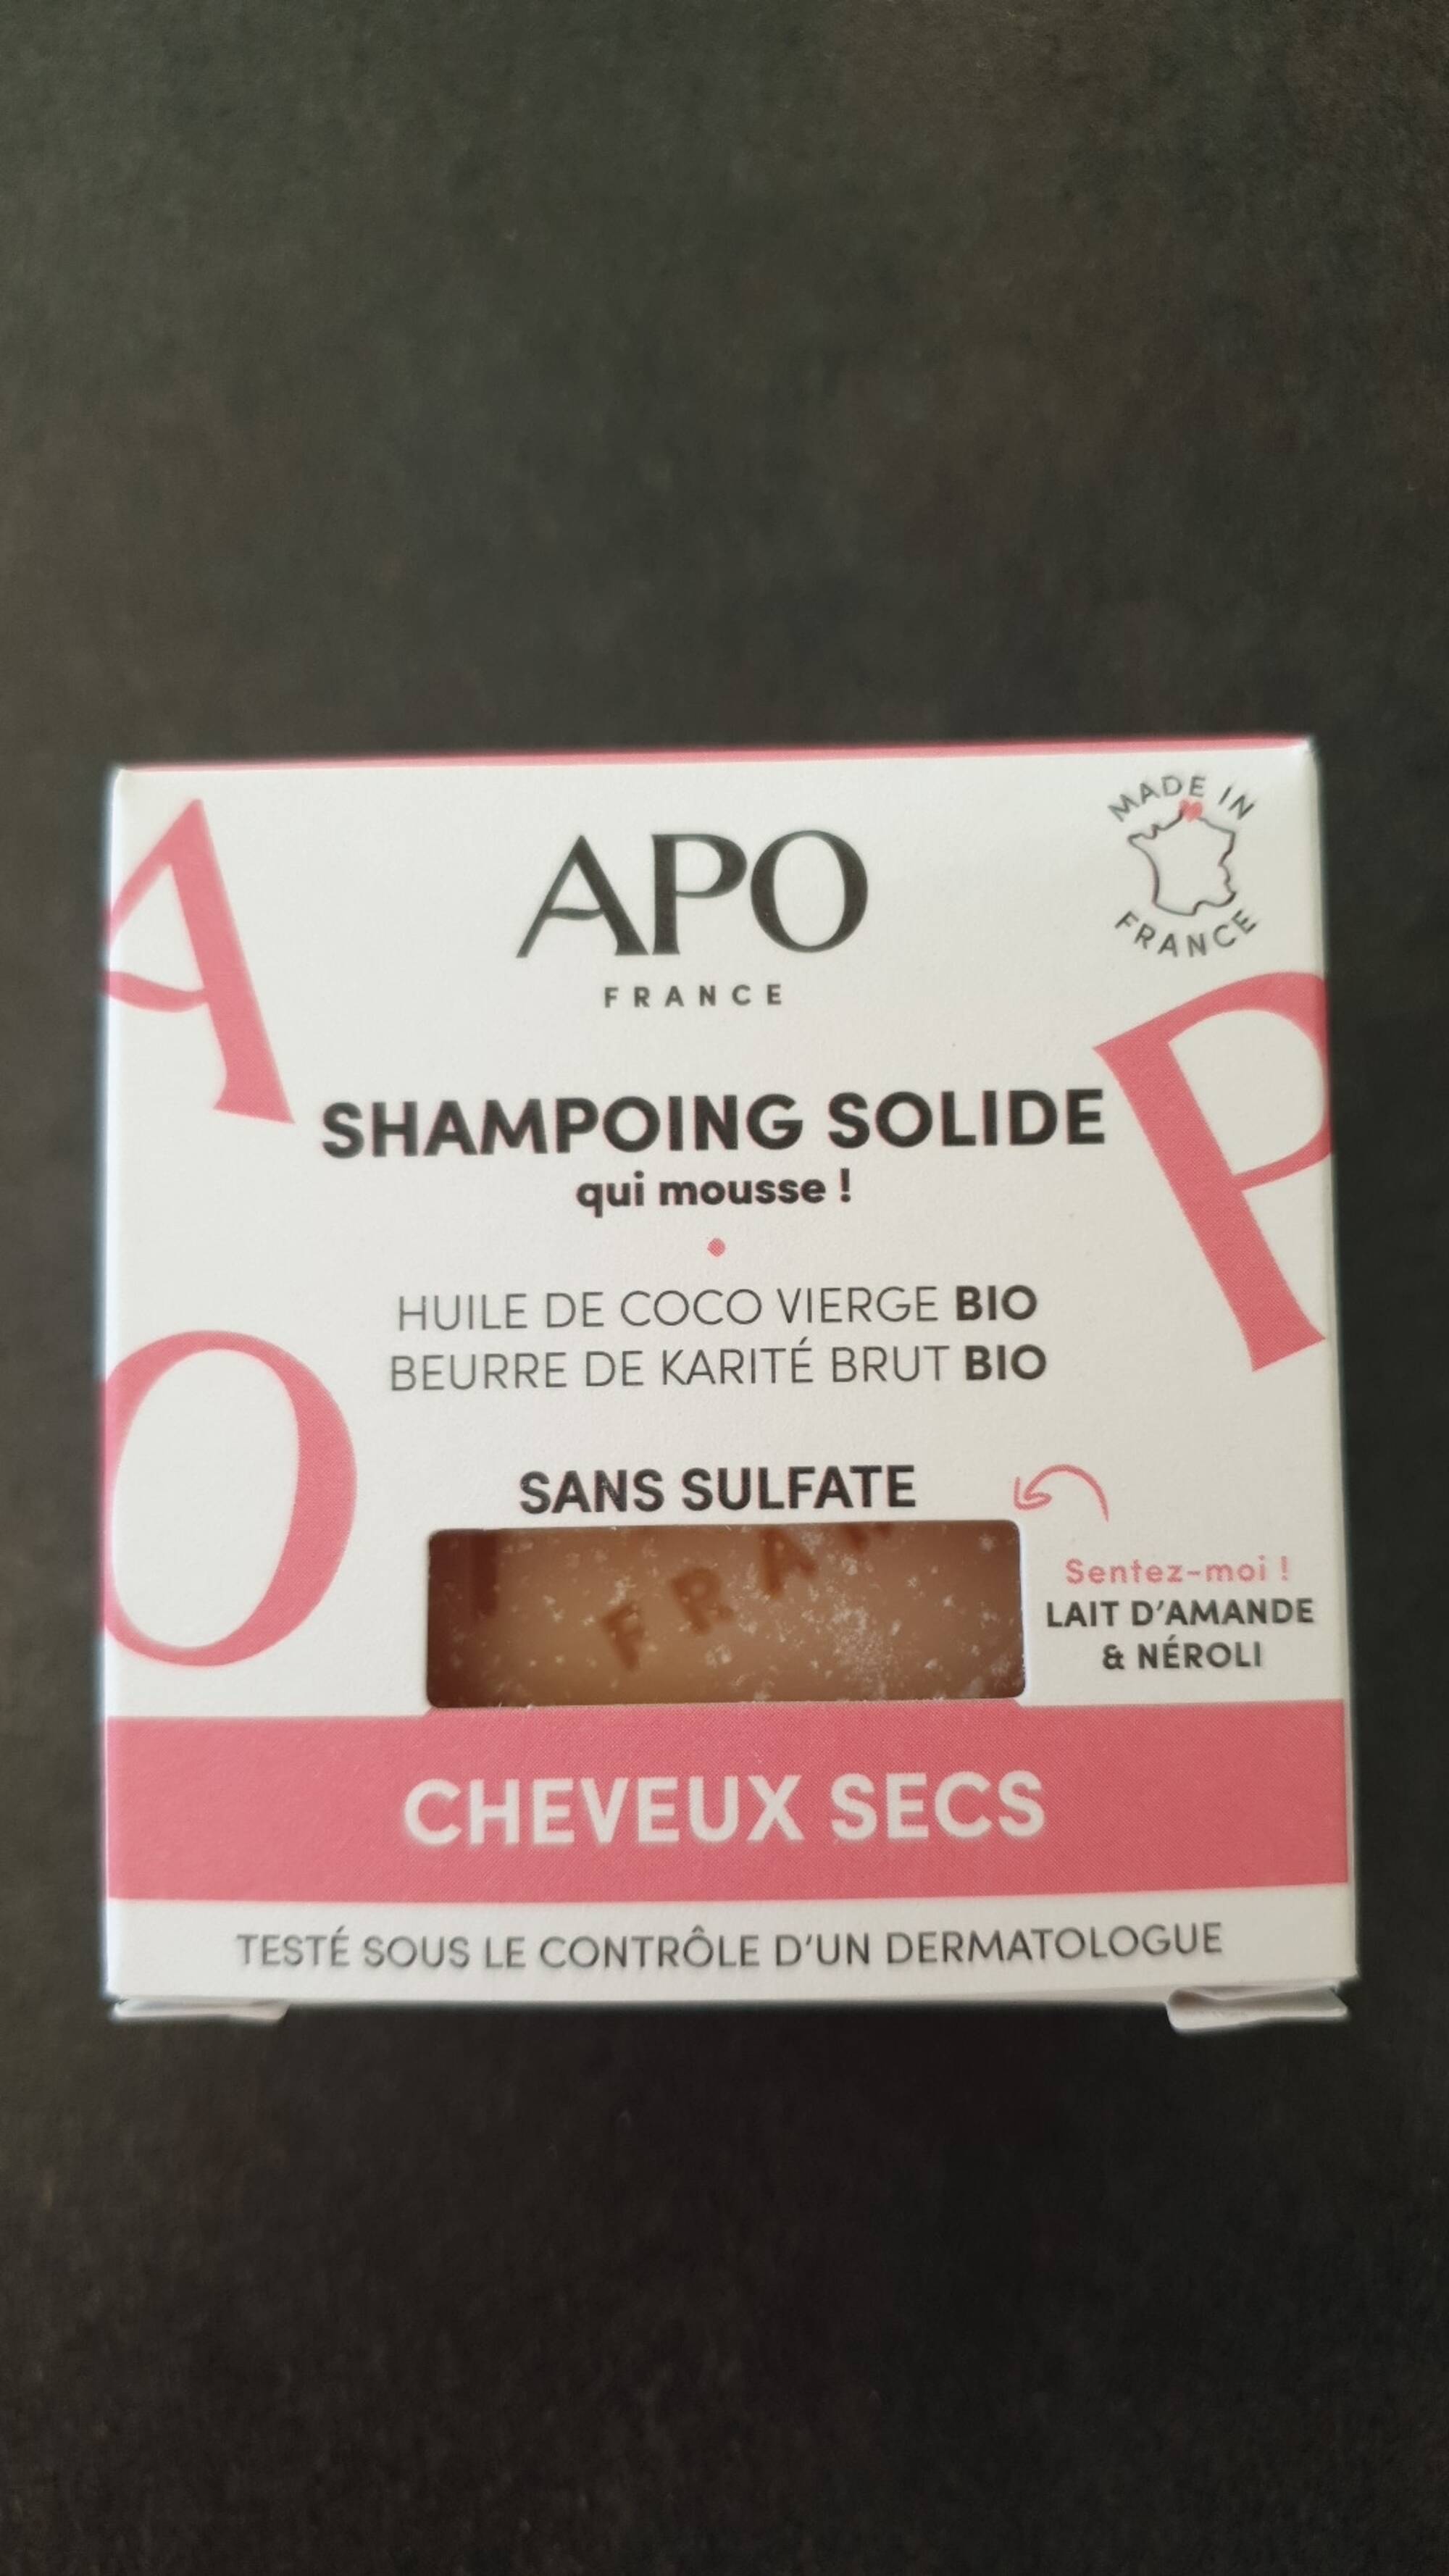 APO FRANCE - Shampooing solide